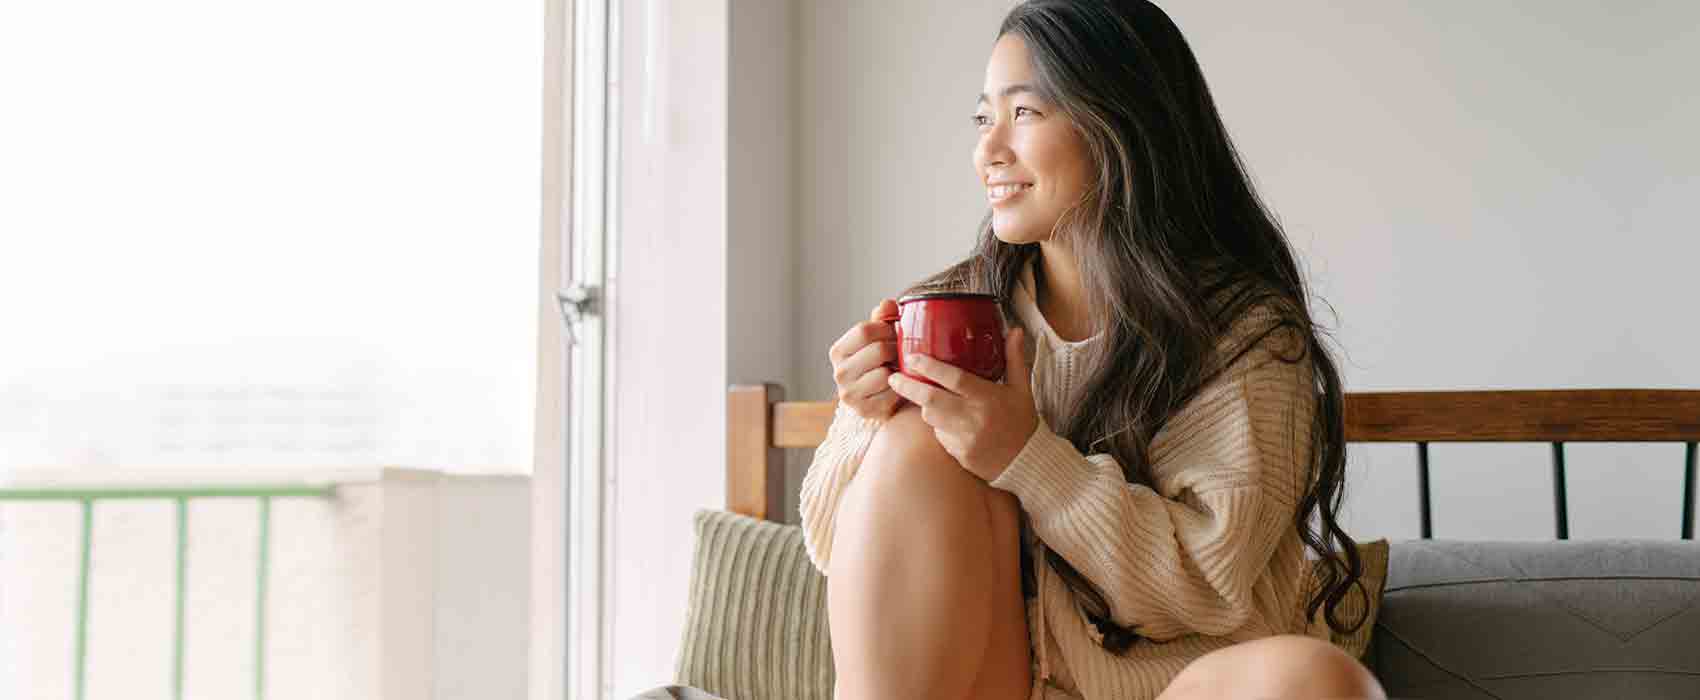 Young woman holding a mug and sitting on her bed looking out the window.